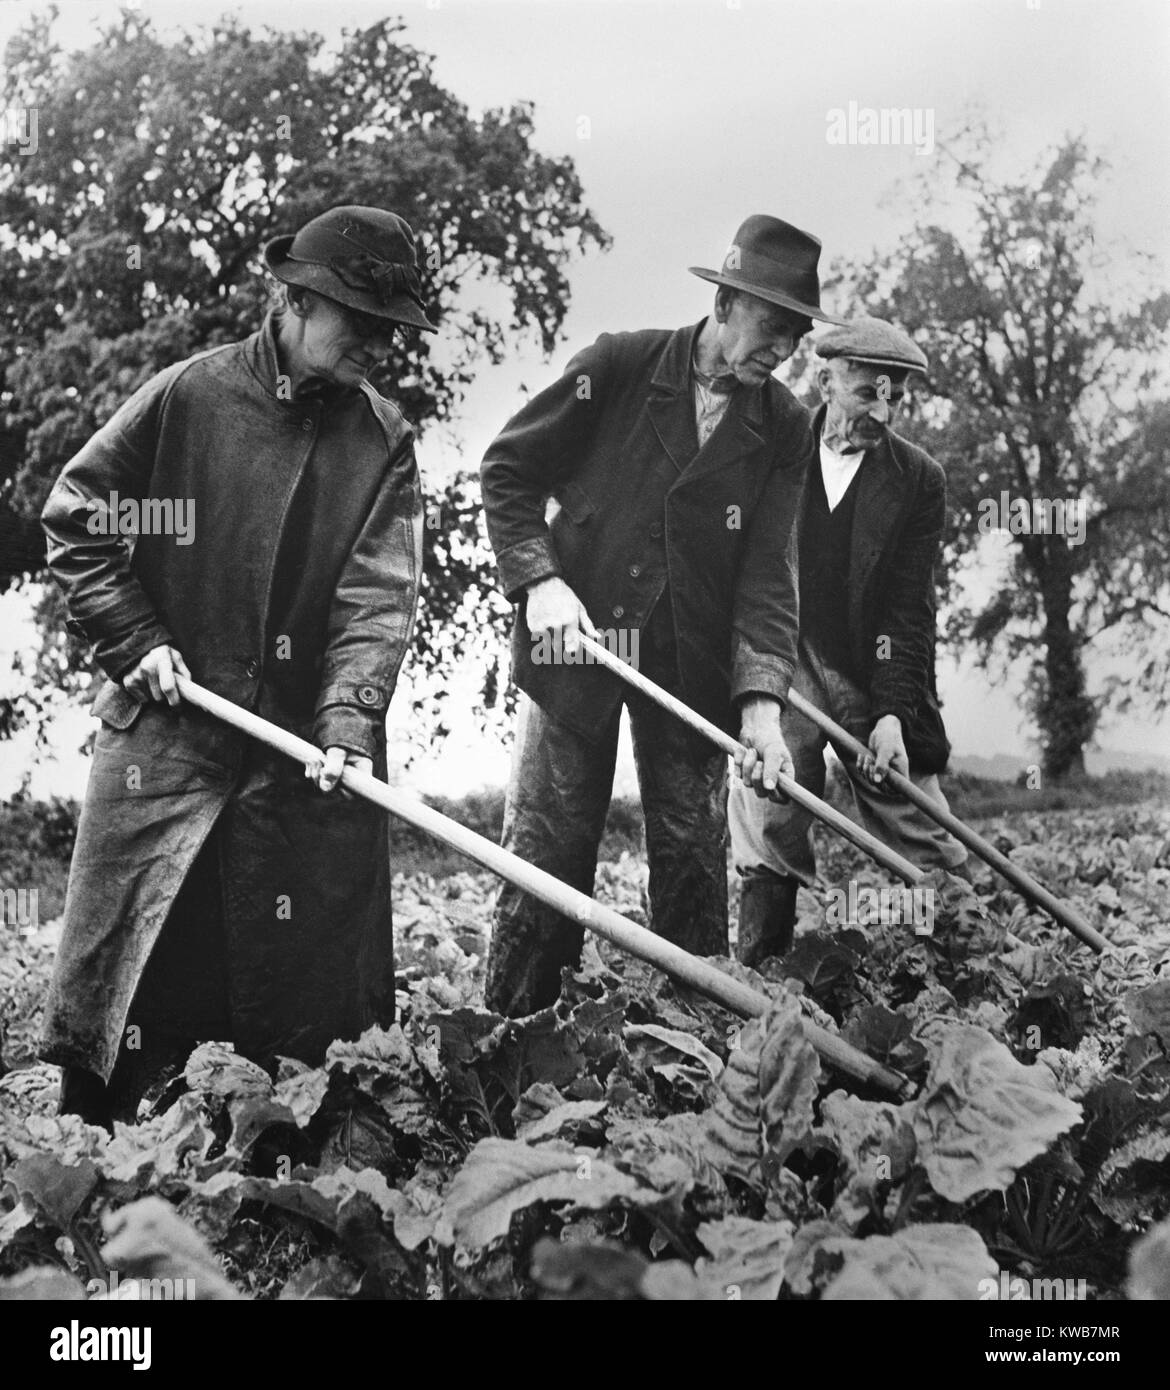 British elders put in a full day at farm work to supply their country with needed food. They hoe their sugar beet crop at Essex, England. April 1943. World War 2. (BSLOC_2014_10_246) Stock Photo